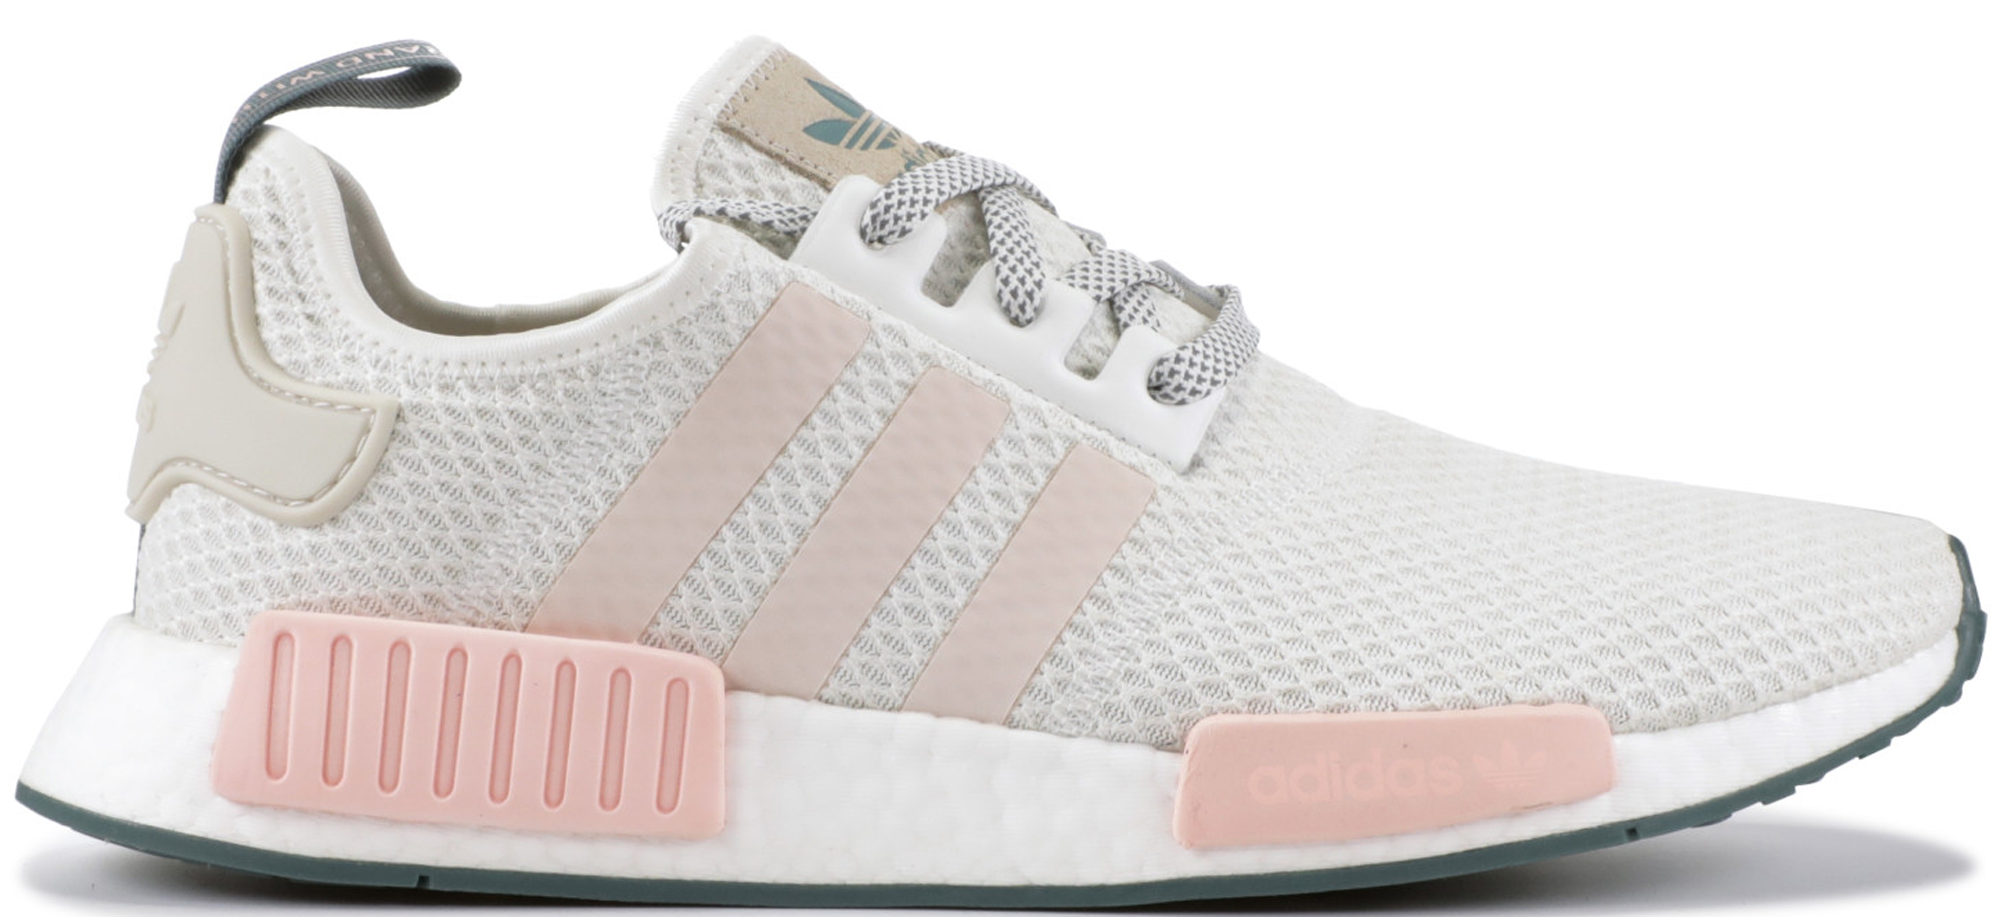 icy pink nmd